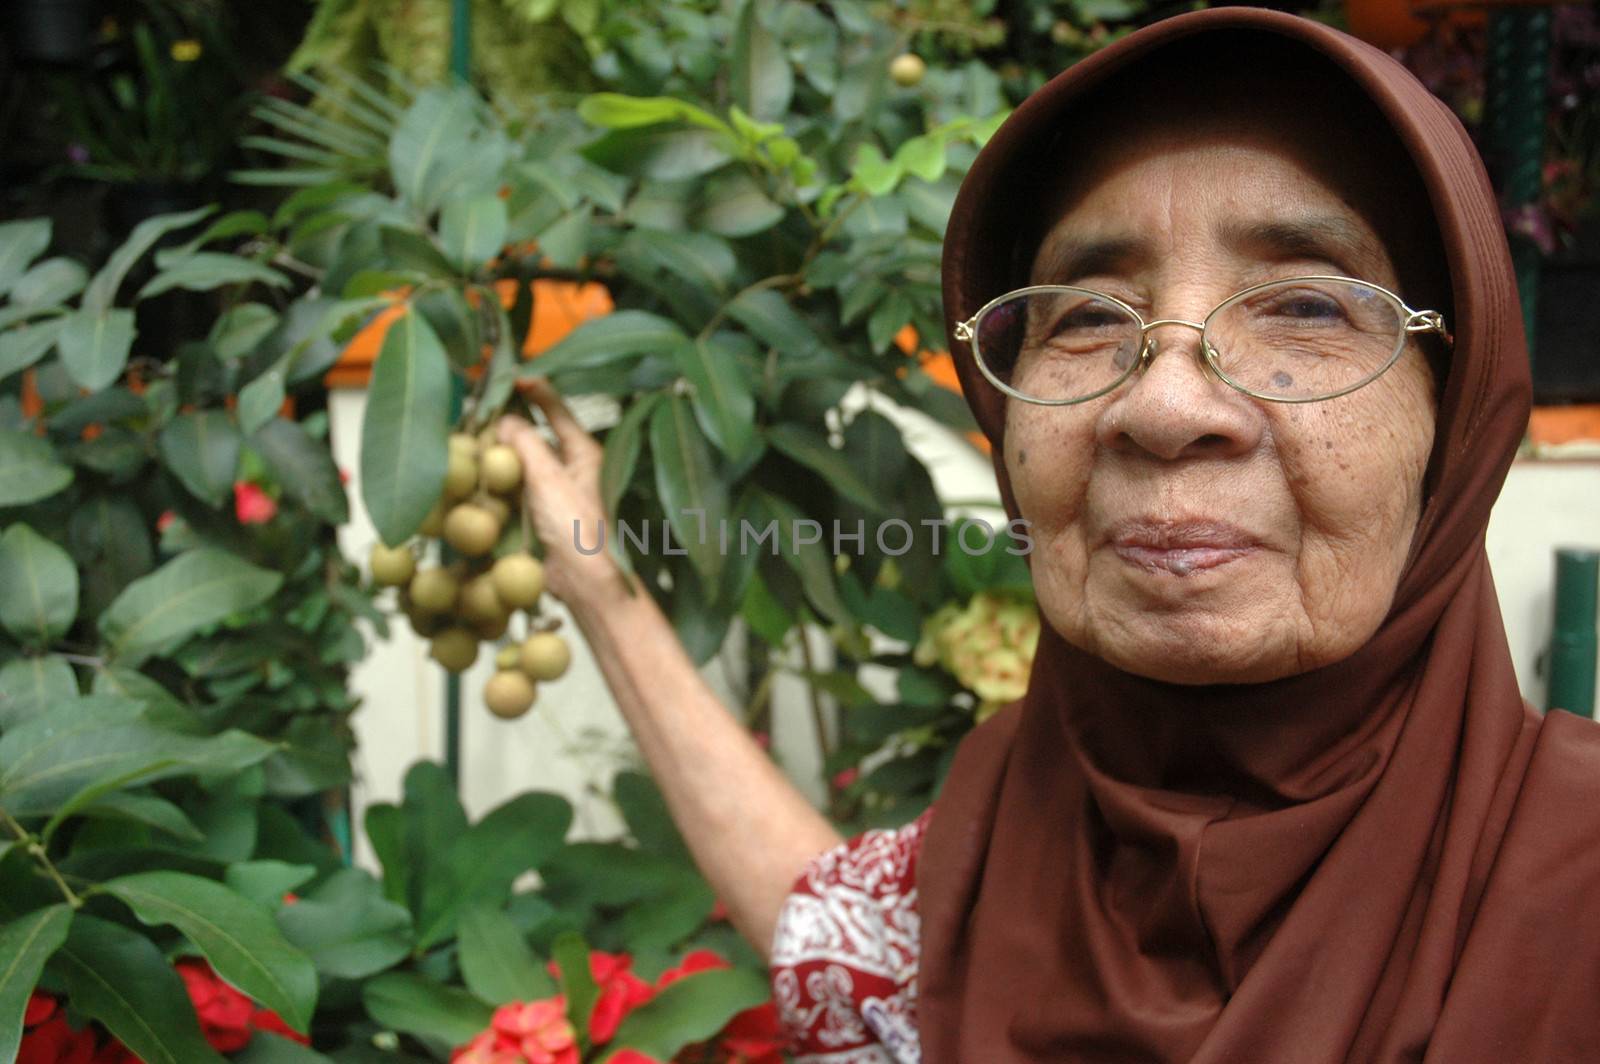 Bandung, Indonesia - March 17, 2012: Grandmother holding longan fruit on its tree.